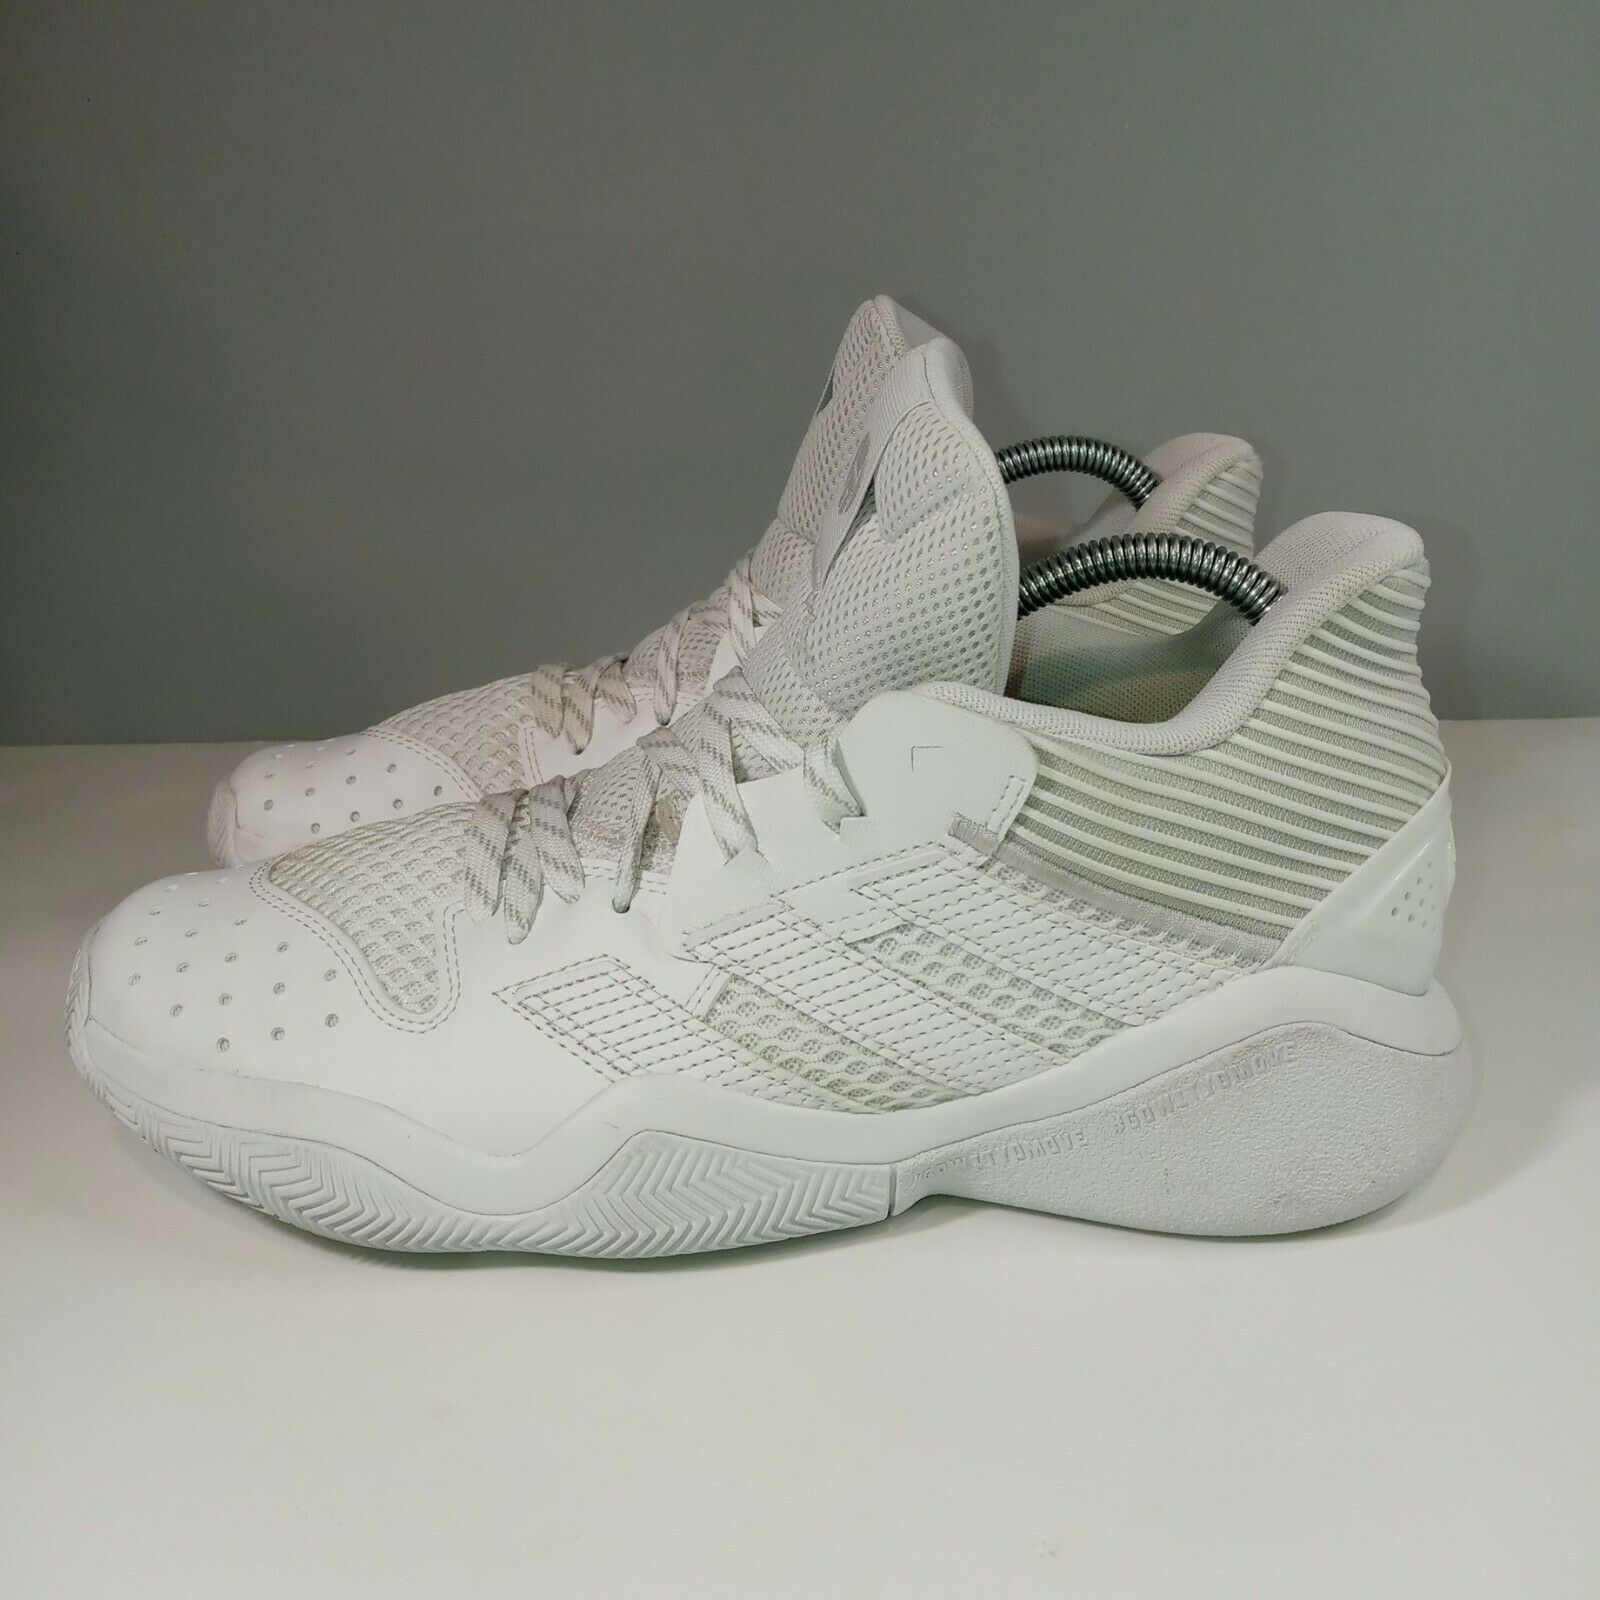 Adidas Mens Harden Stepback All White Basketball Shoes Size 8.5